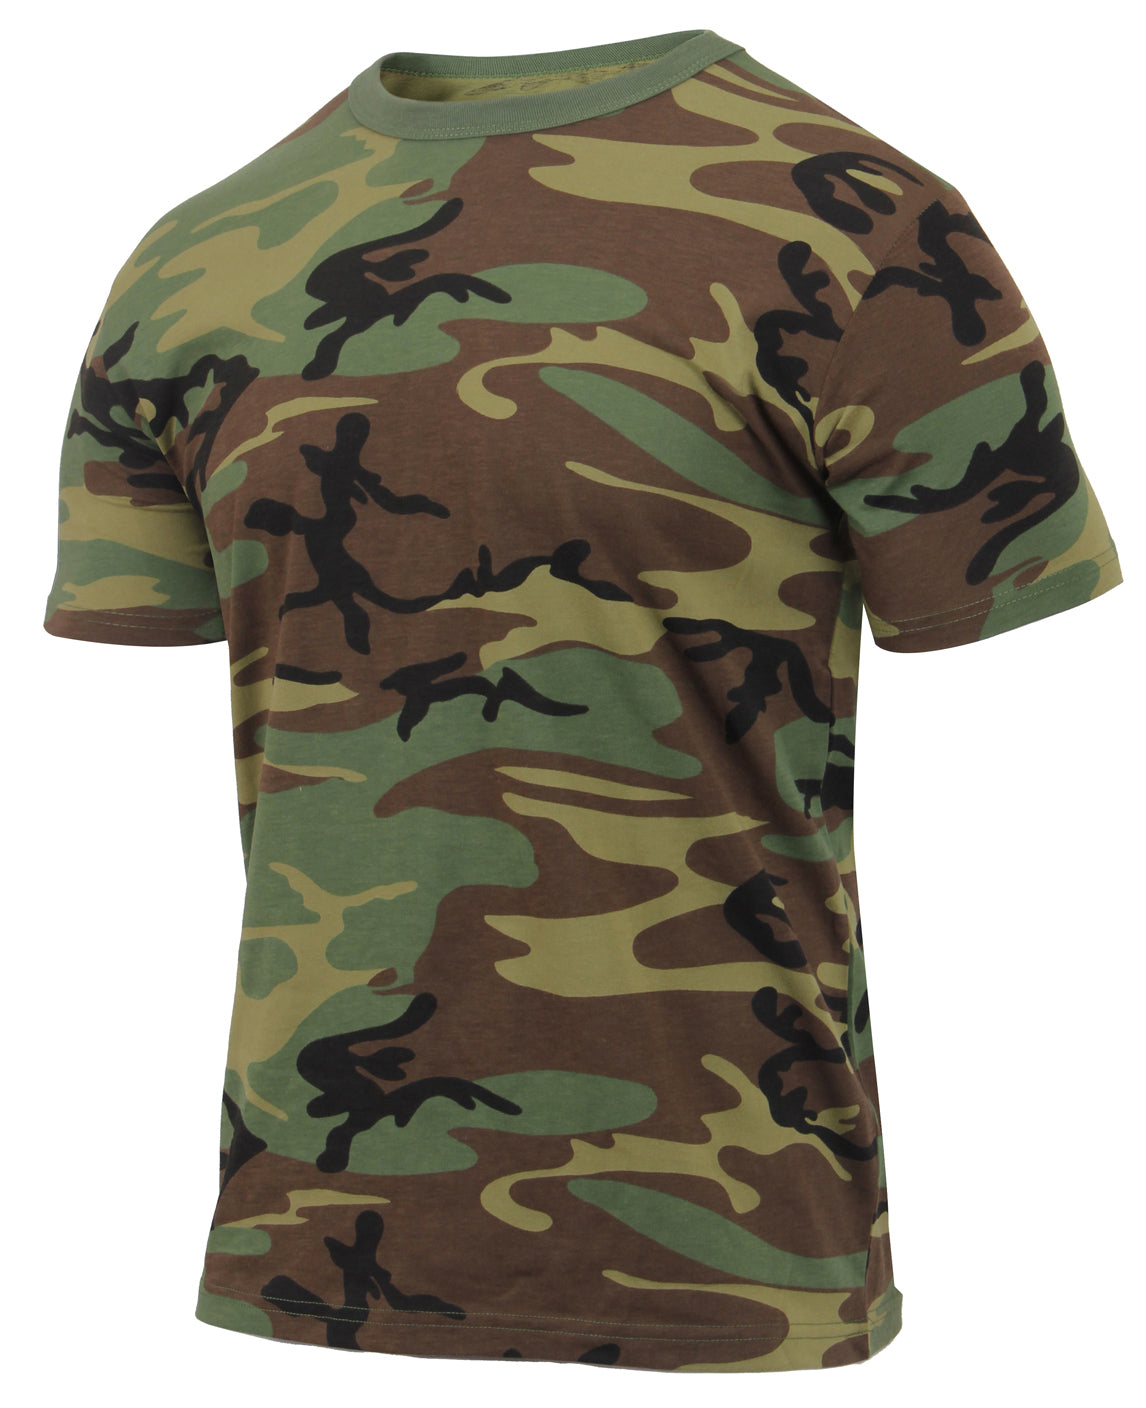 Men's Athletic Cut Woodland Camo T-Shirt - Rothco Athletic Fit Short Sleeve Tee